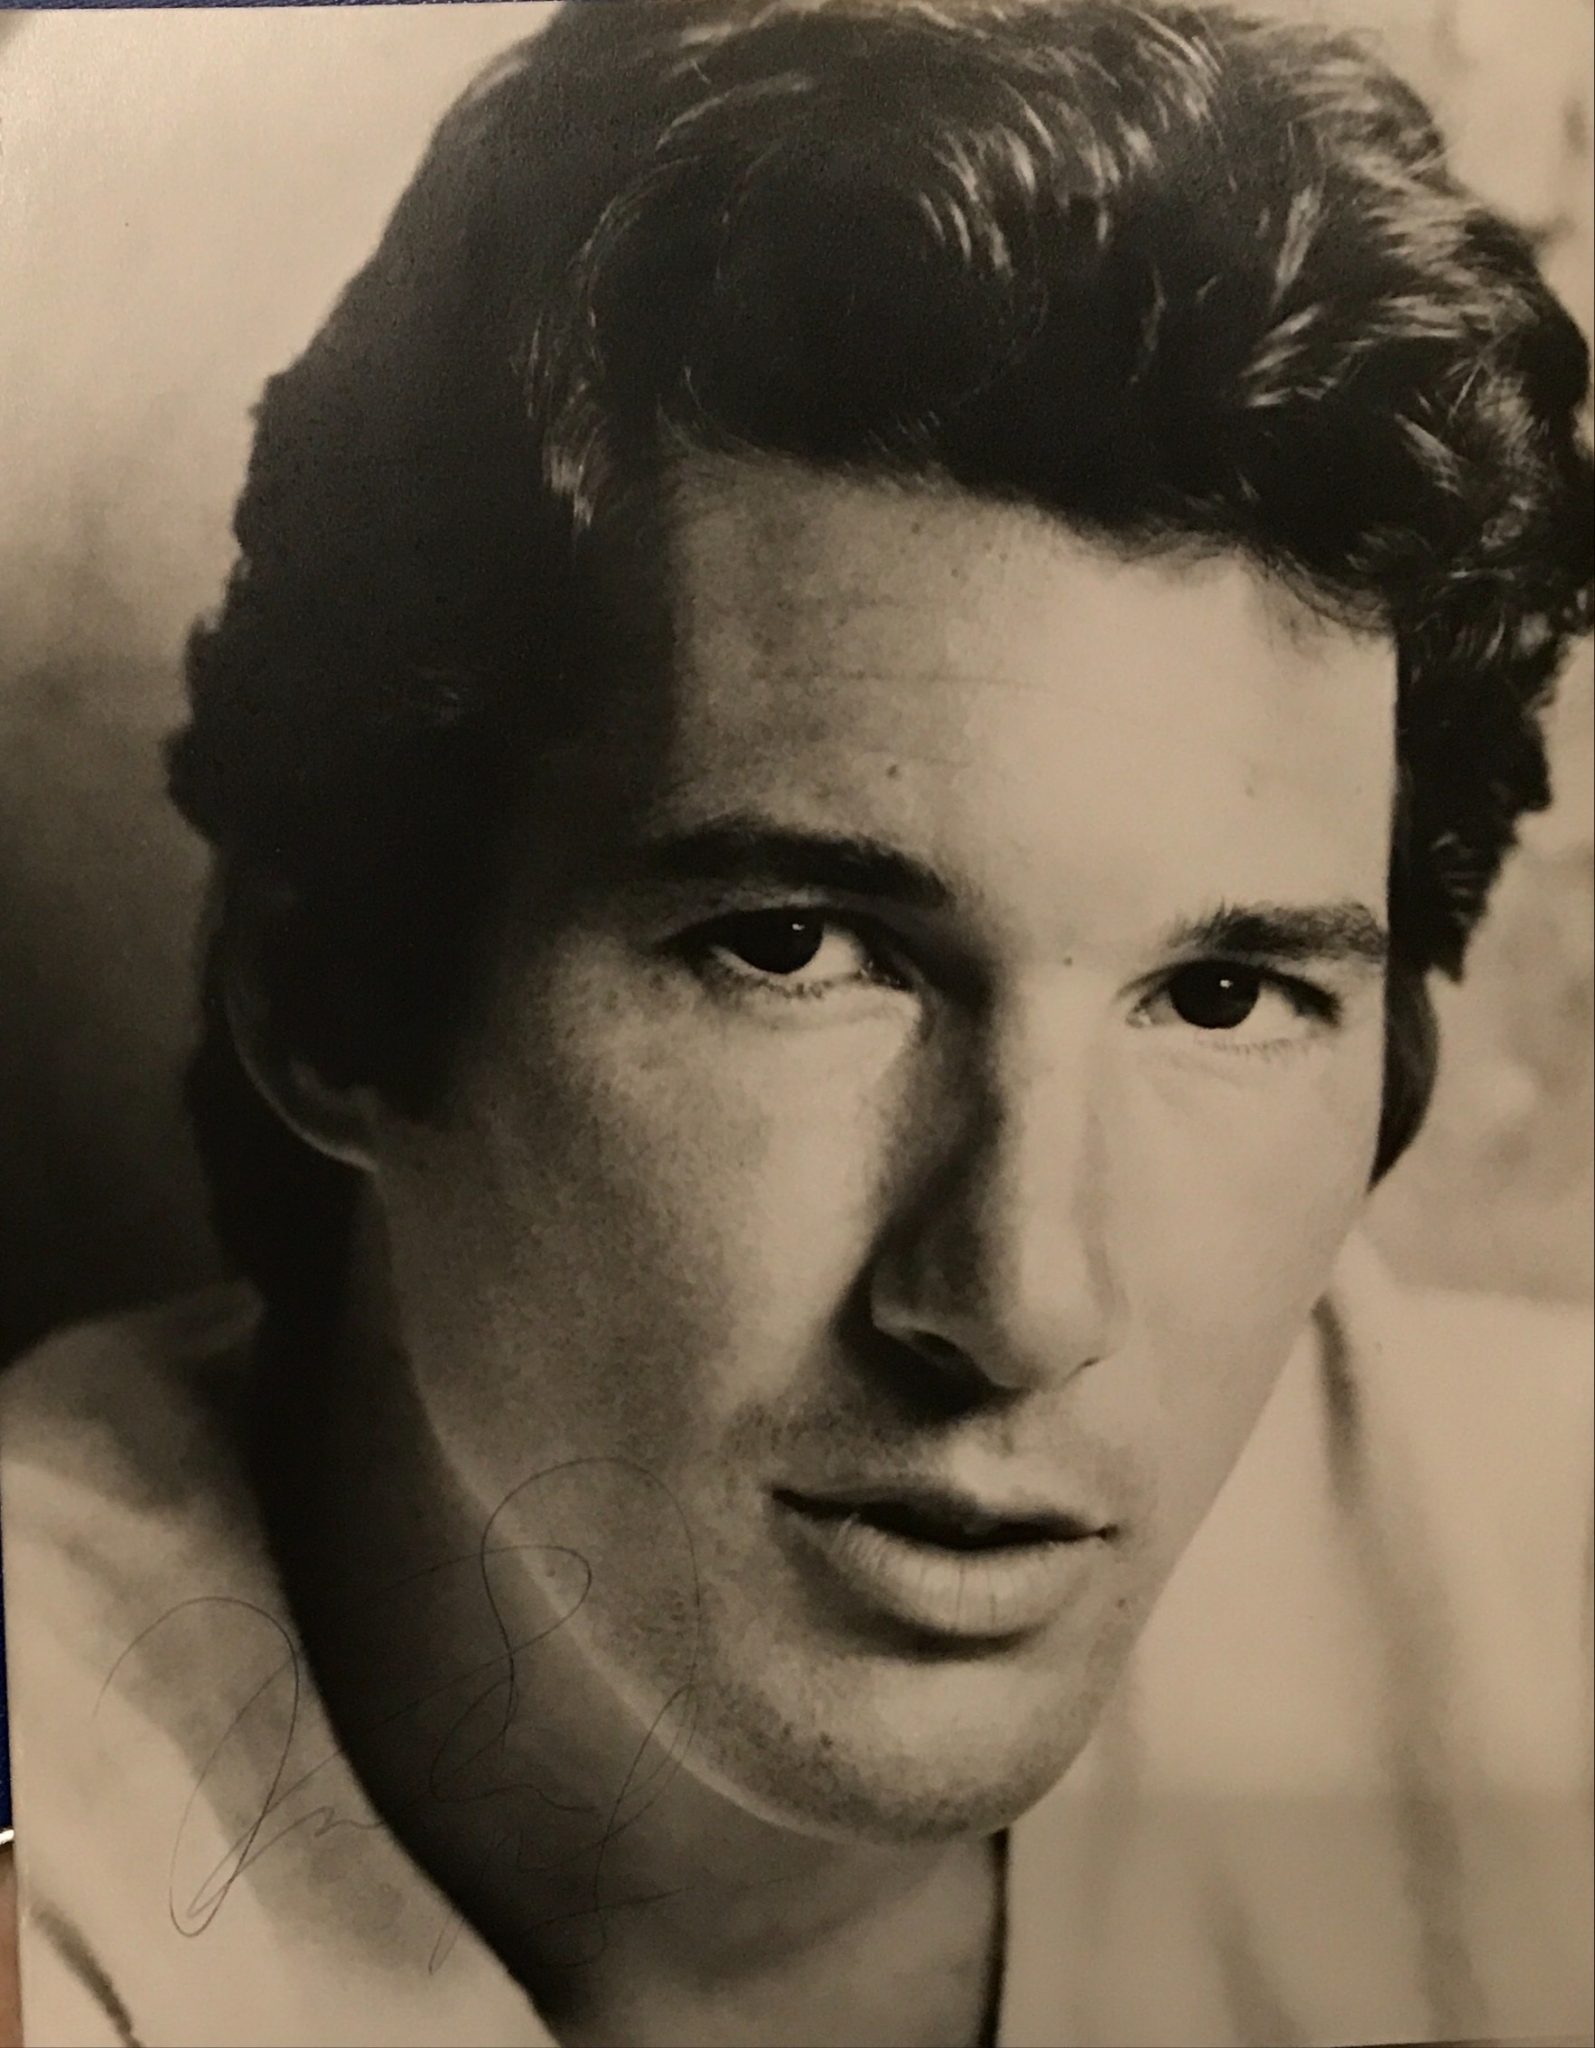 Richard Gere Movies And Autographed Portraits Through The Decades